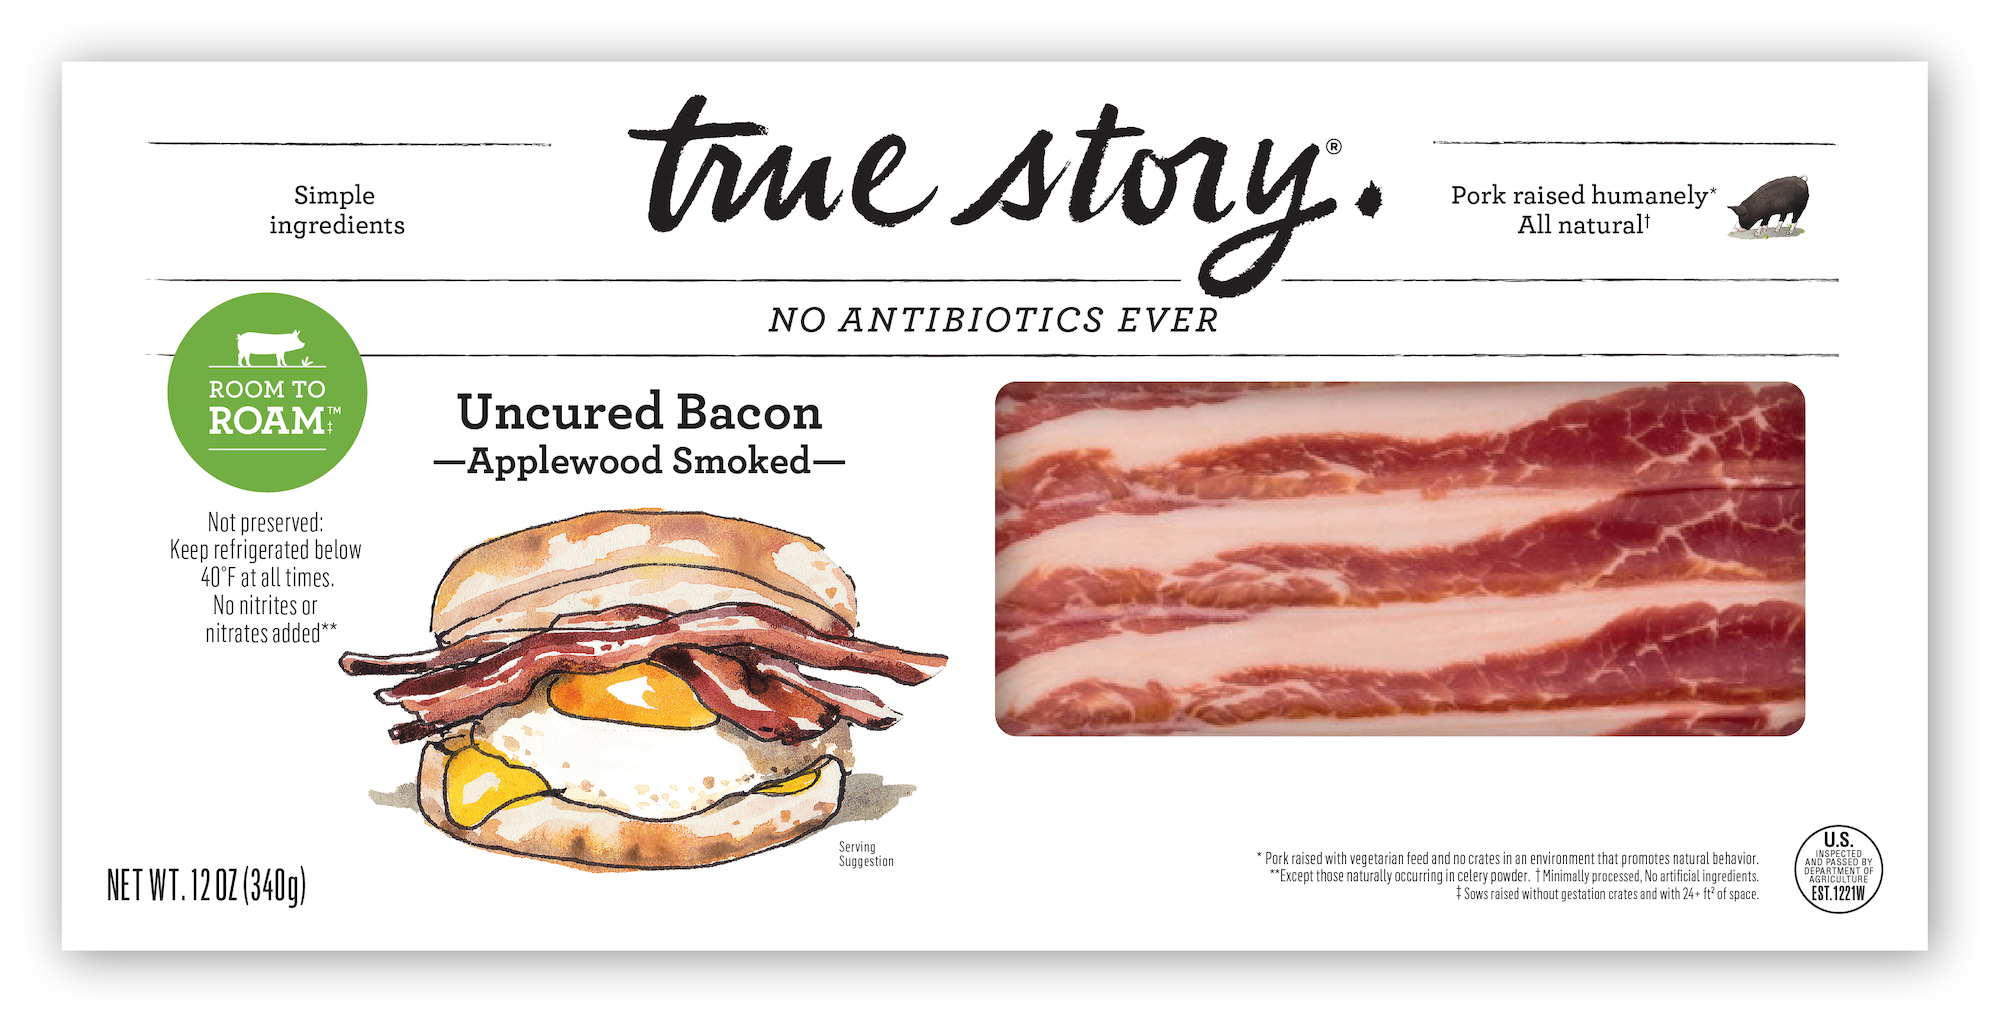 Room to Roam Bacon Product Packaging